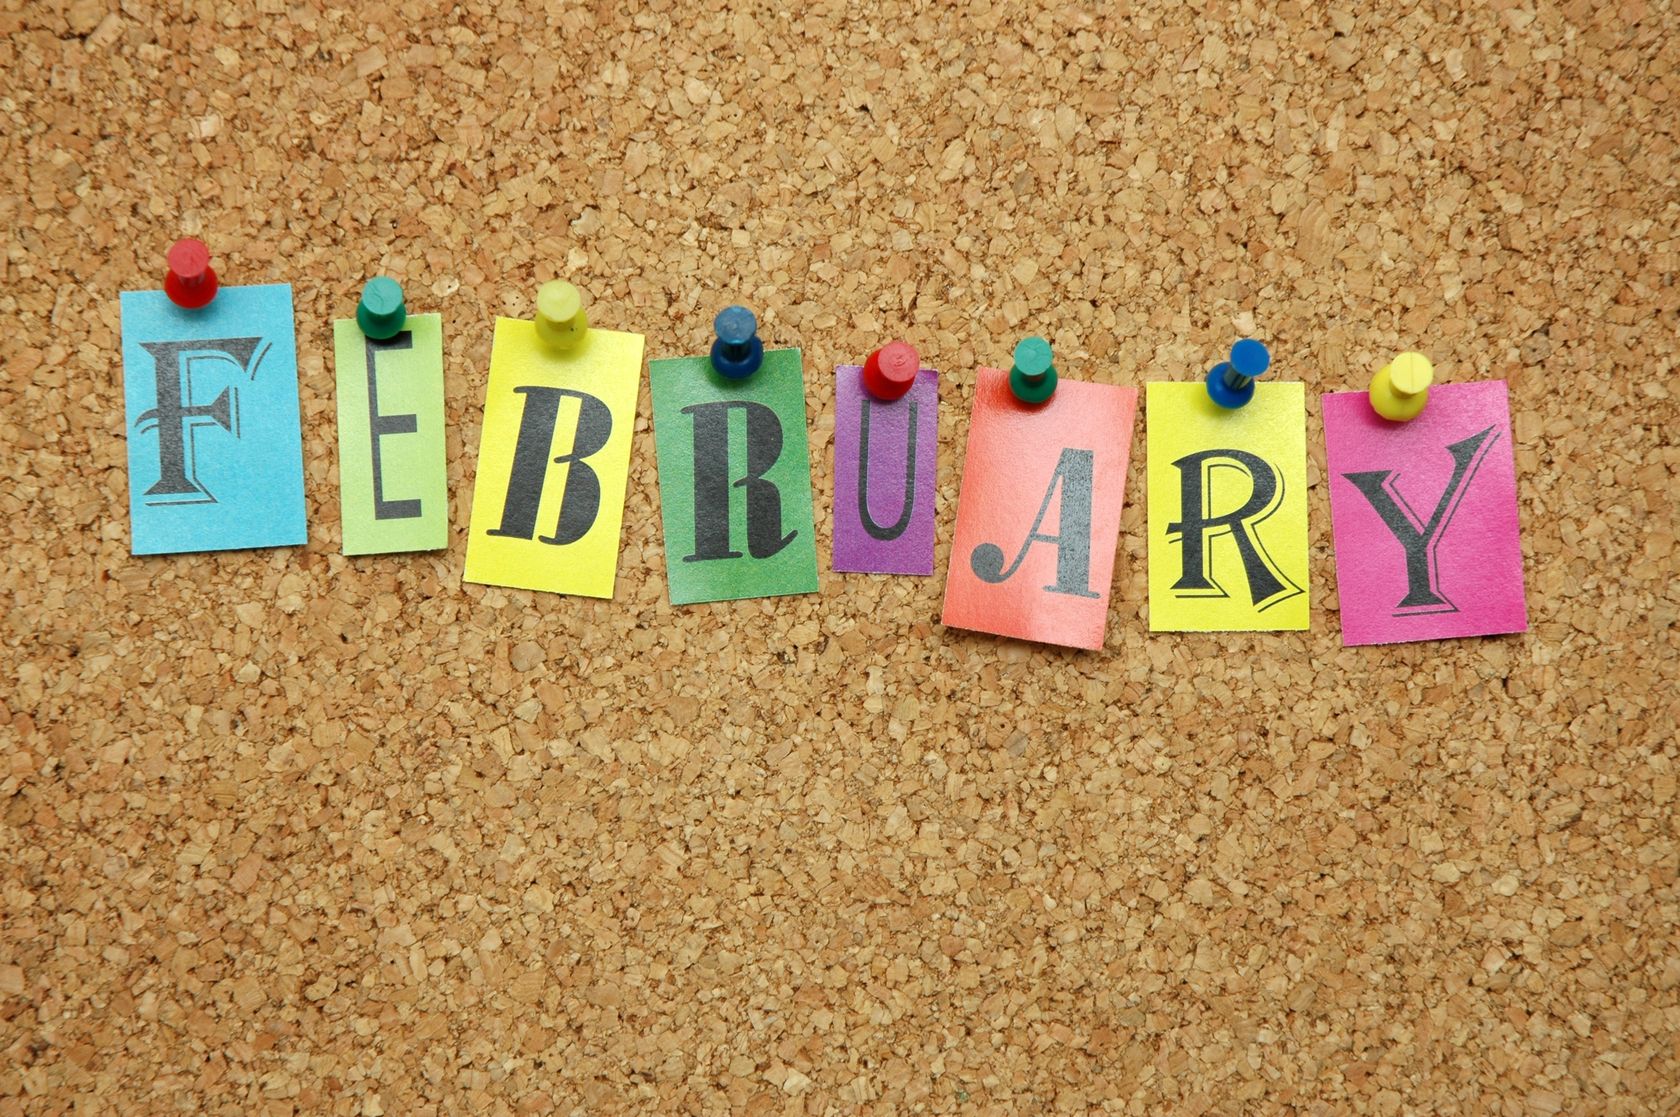 February is month of the year. February картинки. Картина my February. February картинки надпись. February month.